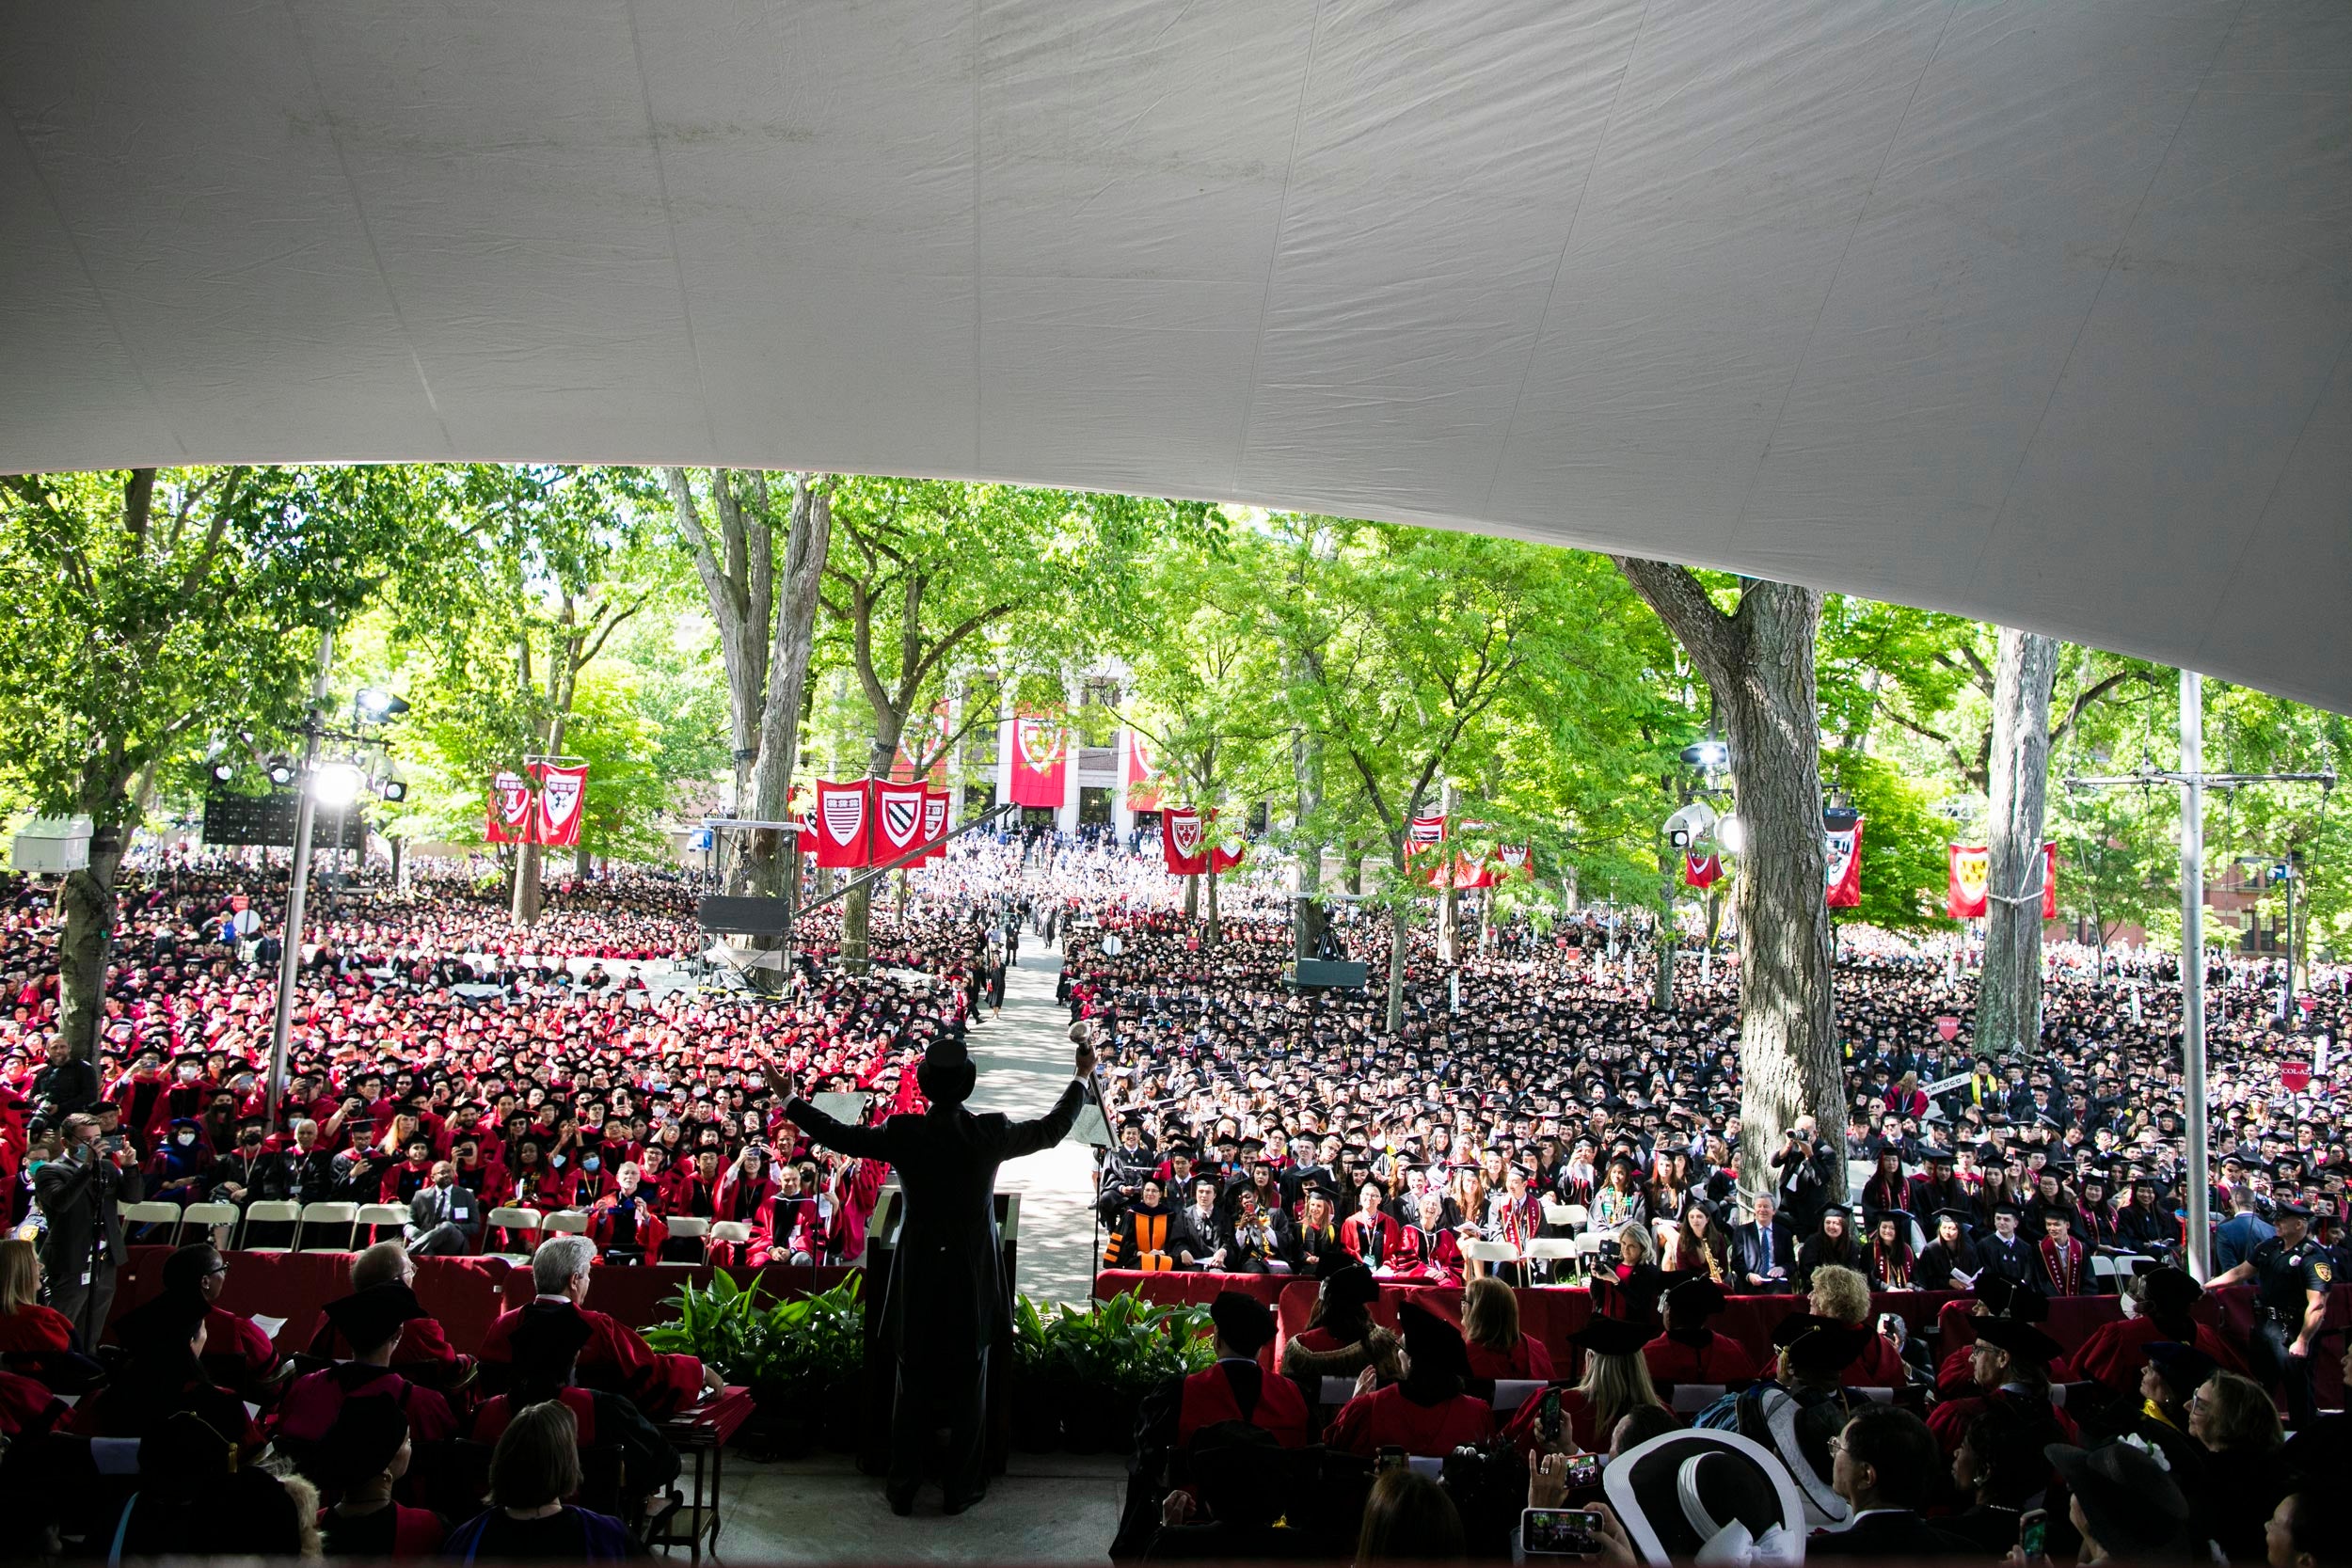 Tercentenary Theatre during Commencement.